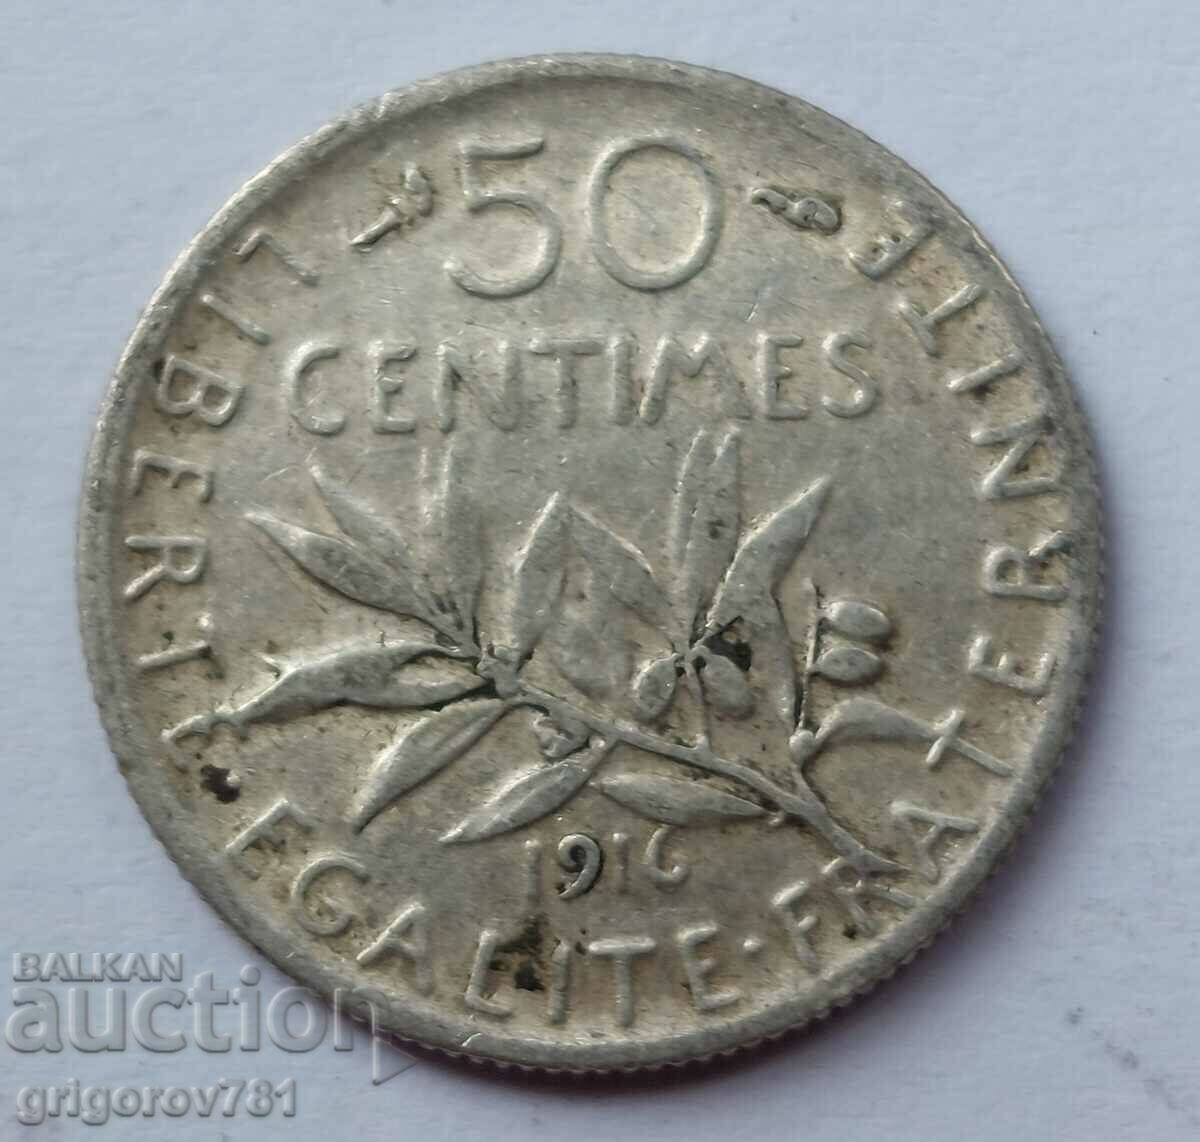 50 centimes silver France 1916 - silver coin №55